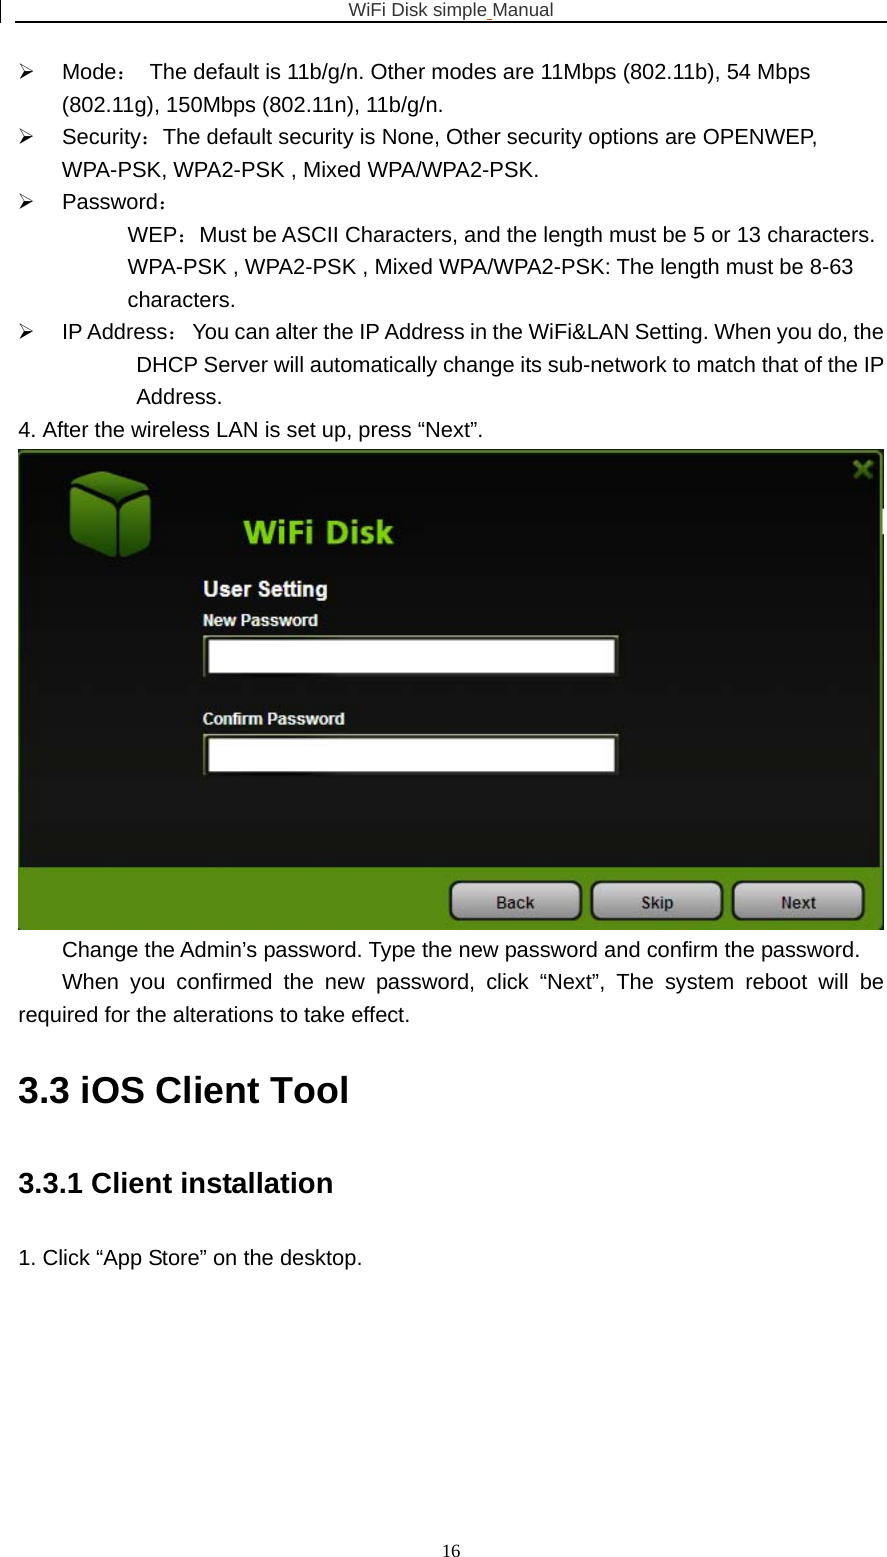 WiFi Disk simple Manual  16¾ Mode：  The default is 11b/g/n. Other modes are 11Mbps (802.11b), 54 Mbps (802.11g), 150Mbps (802.11n), 11b/g/n. ¾ Security：The default security is None, Other security options are OPENWEP, WPA-PSK, WPA2-PSK , Mixed WPA/WPA2-PSK. ¾ Password： WEP：Must be ASCII Characters, and the length must be 5 or 13 characters. WPA-PSK , WPA2-PSK , Mixed WPA/WPA2-PSK: The length must be 8-63 characters. ¾ IP Address：  You can alter the IP Address in the WiFi&amp;LAN Setting. When you do, the DHCP Server will automatically change its sub-network to match that of the IP Address. 4. After the wireless LAN is set up, press “Next”.  Change the Admin’s password. Type the new password and confirm the password. When you confirmed the new password, click “Next”, The system reboot will be required for the alterations to take effect. 3.3 iOS Client Tool 3.3.1 Client installation 1. Click “App Store” on the desktop. 